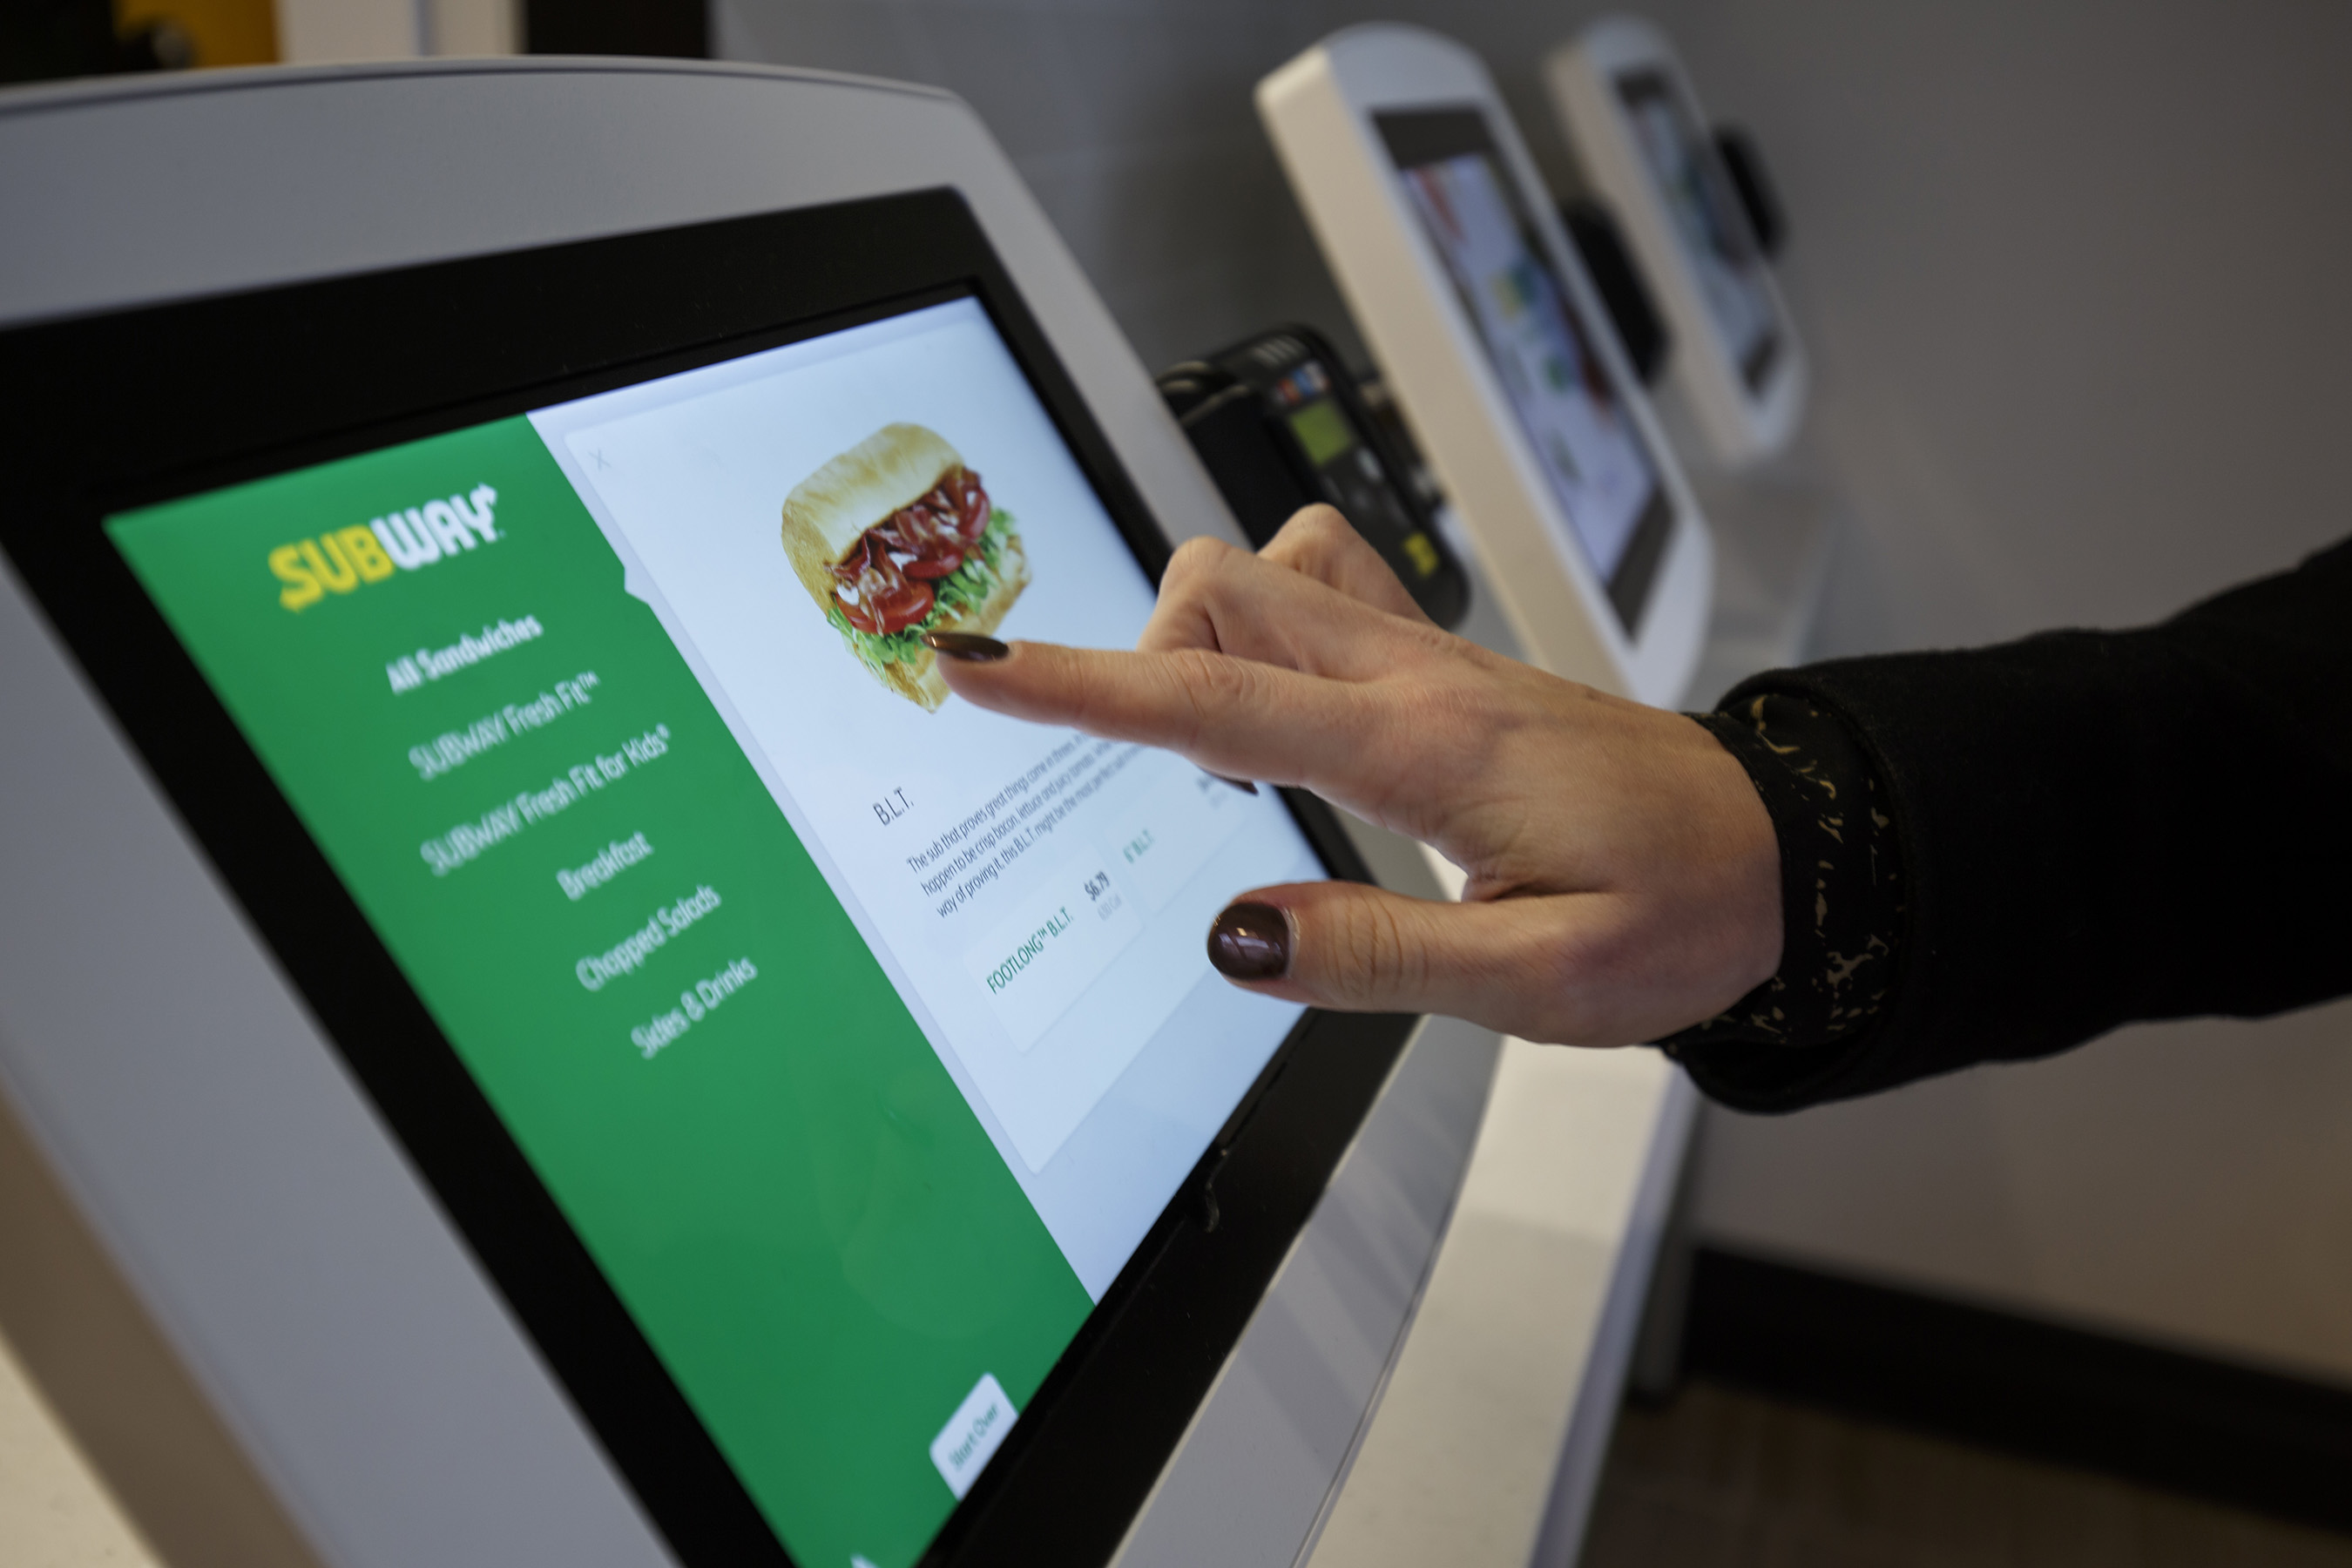 Subway Testing Self-Ordering Kiosks With Apple Pay as Payment Option